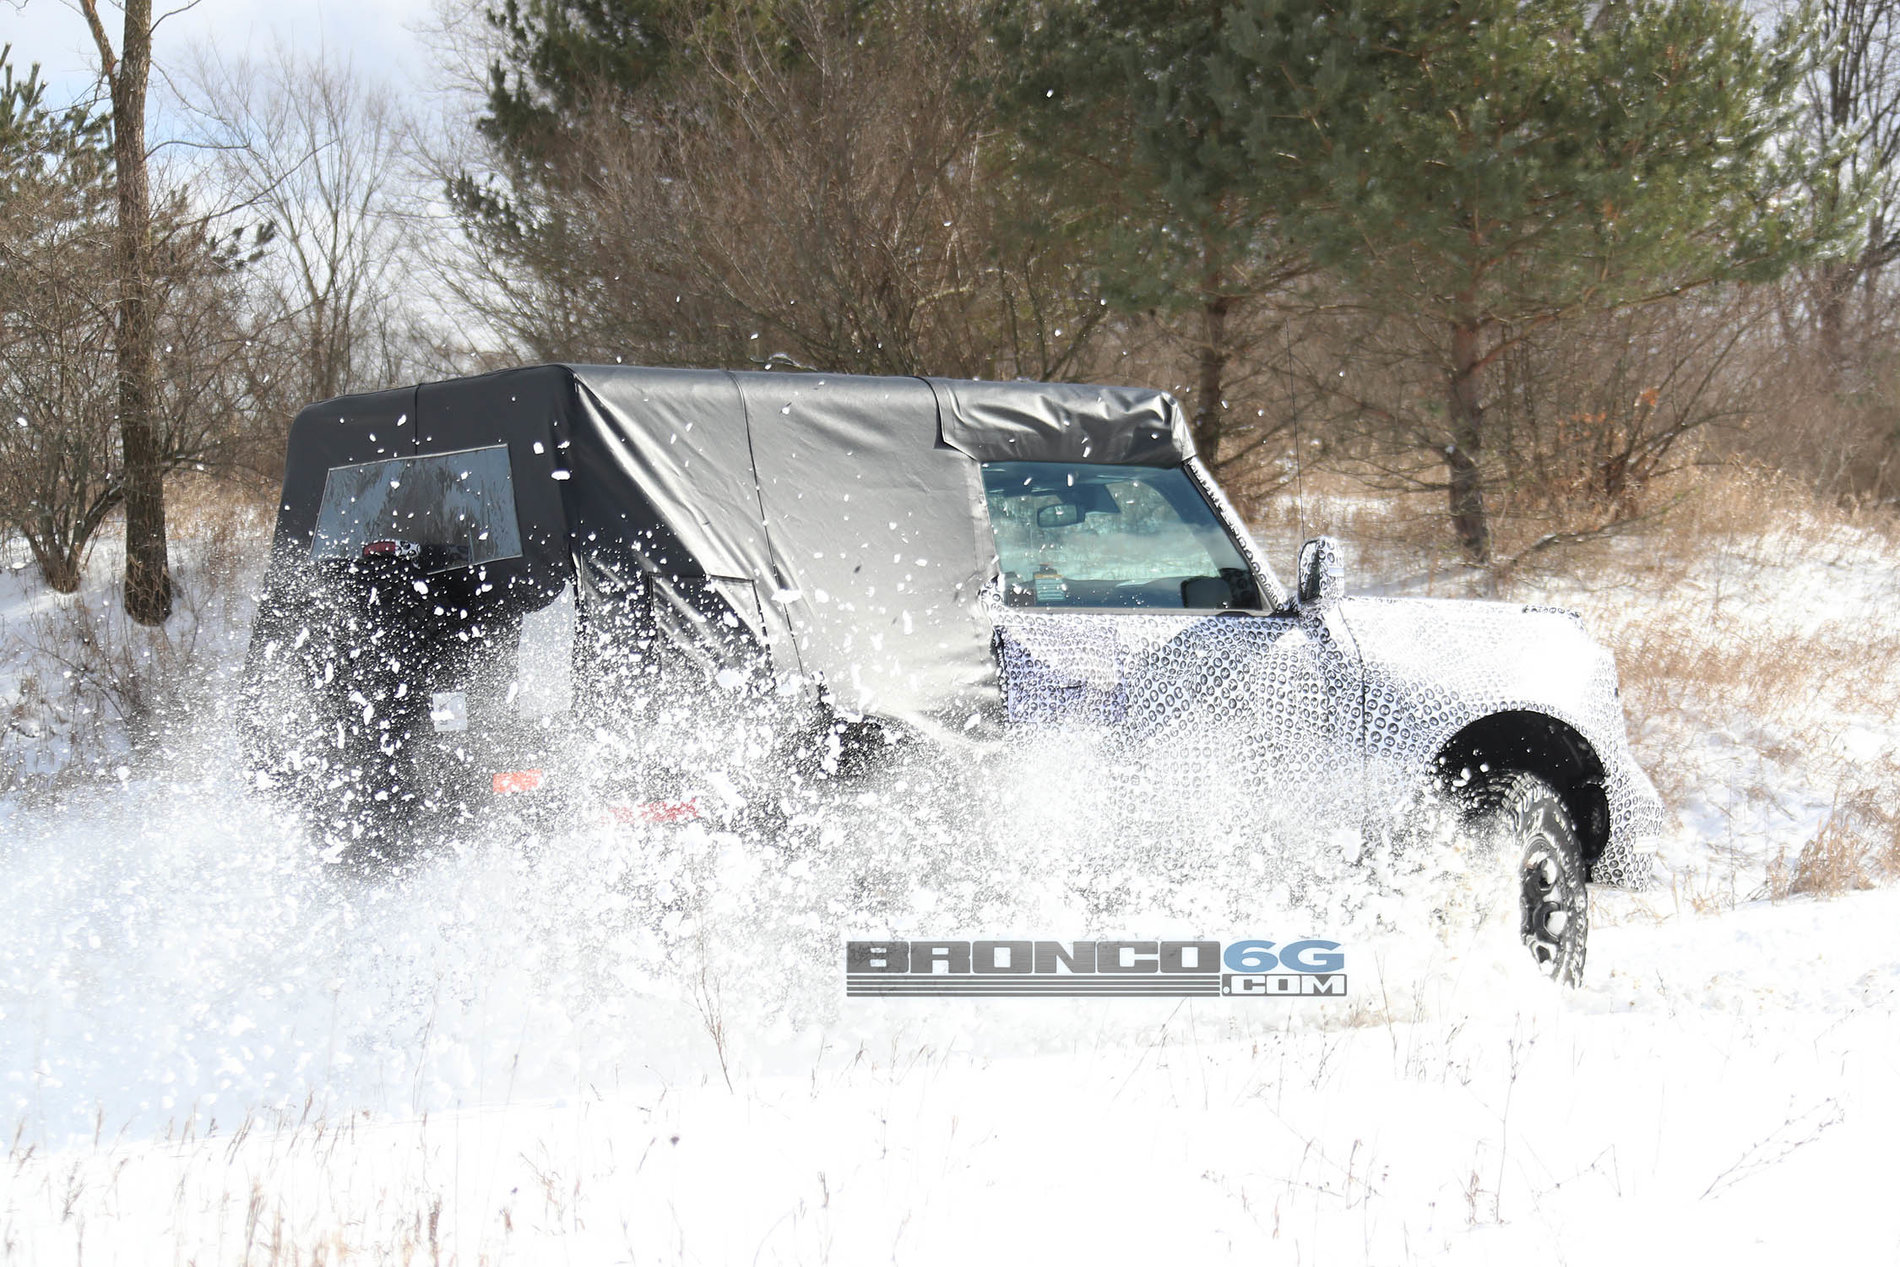 Ford Bronco 2-Door 2021 Bronco Prototype Makes Grand First Appearance, Bombing Through Snow and Catching Air! 2021-Bronco_2door_OffRoad_013